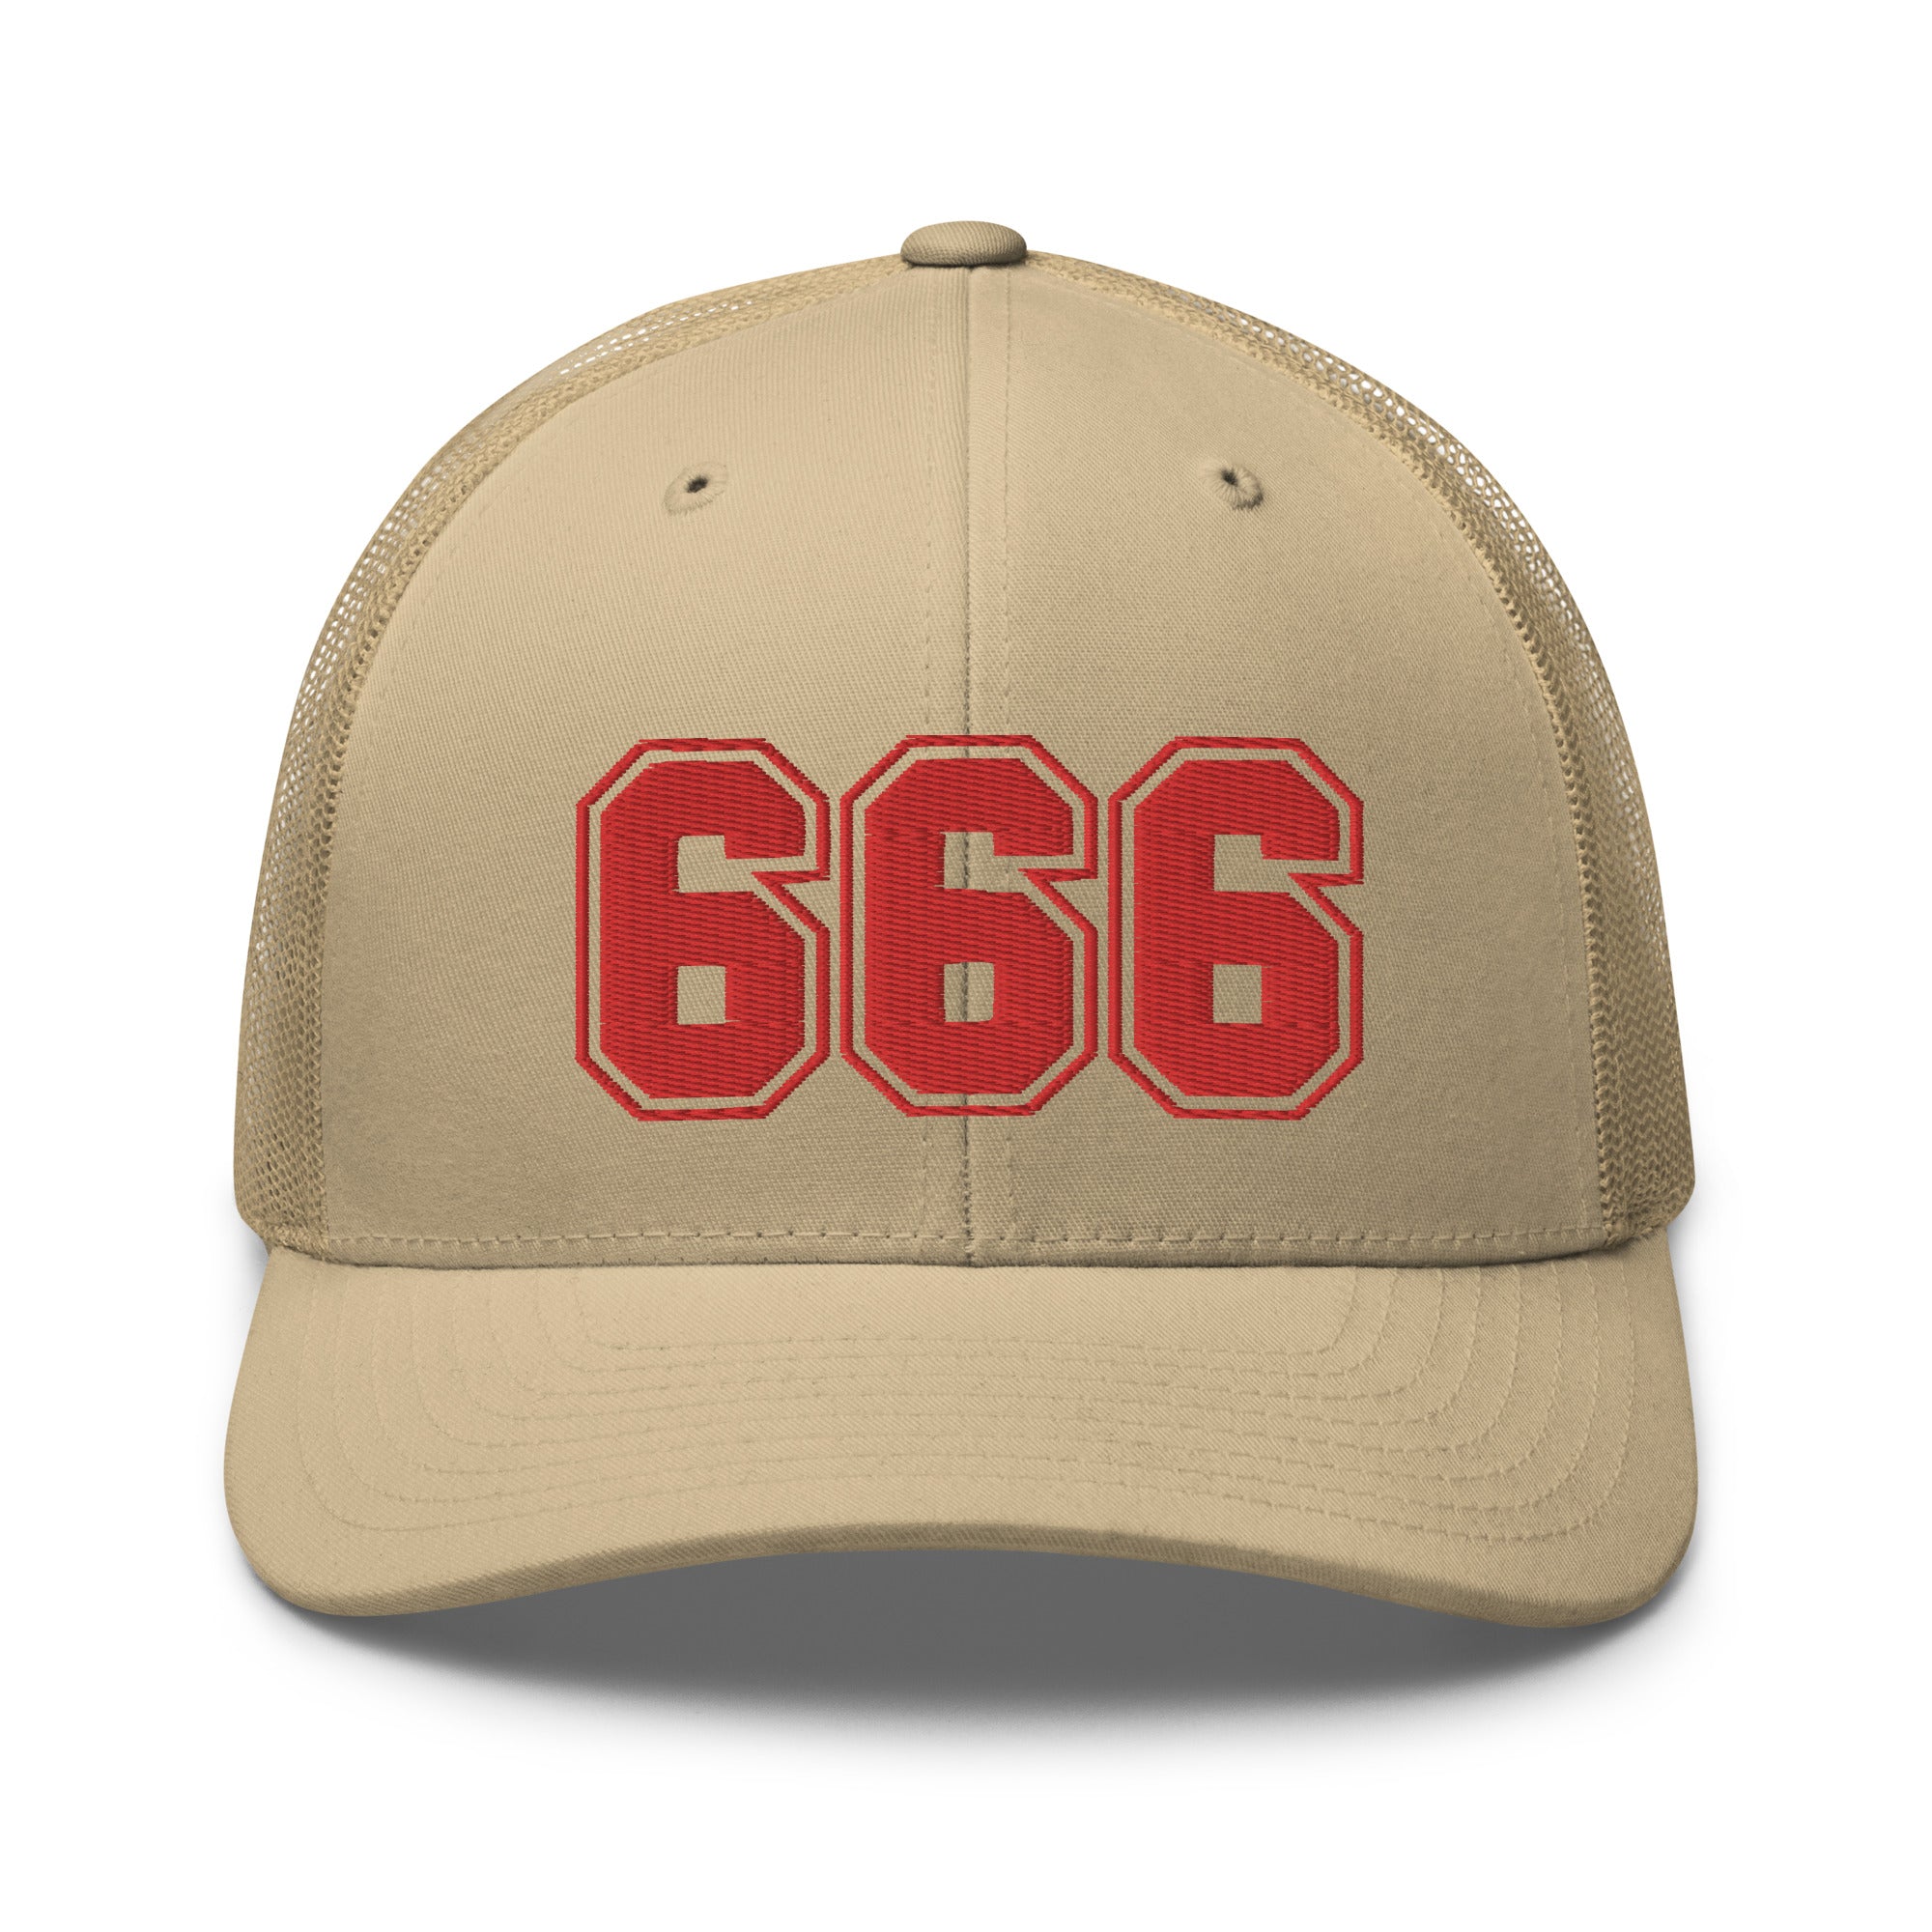 Red 666 Number of the Beast Embroidered Retro Trucker Cap Snapback Hat